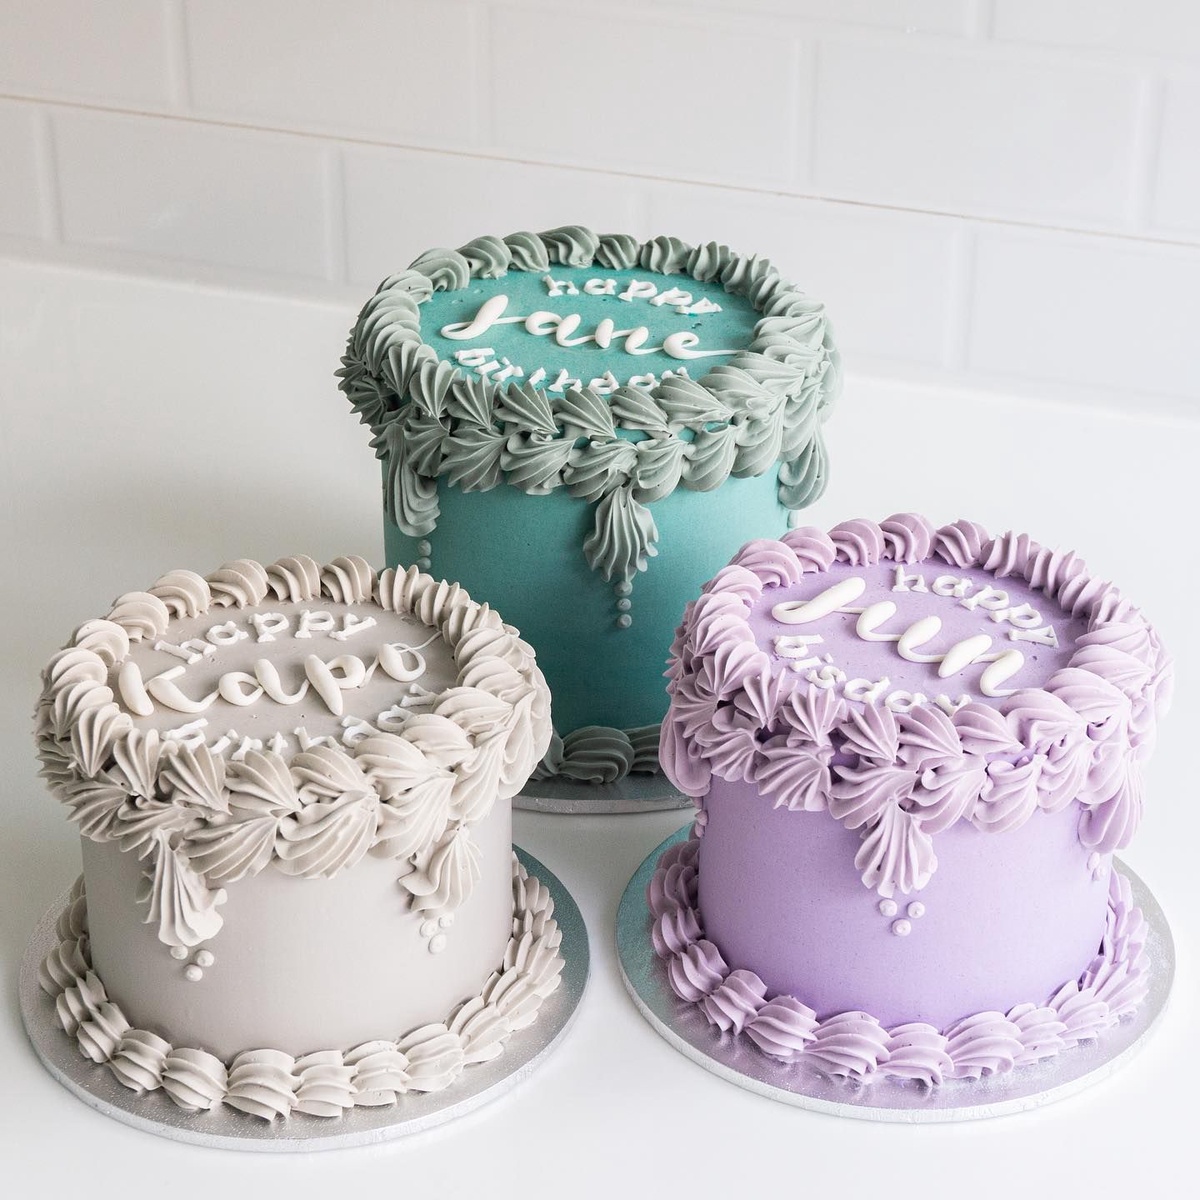 7 Lifestyle Inspired Cake Ideas To Celebrate Over